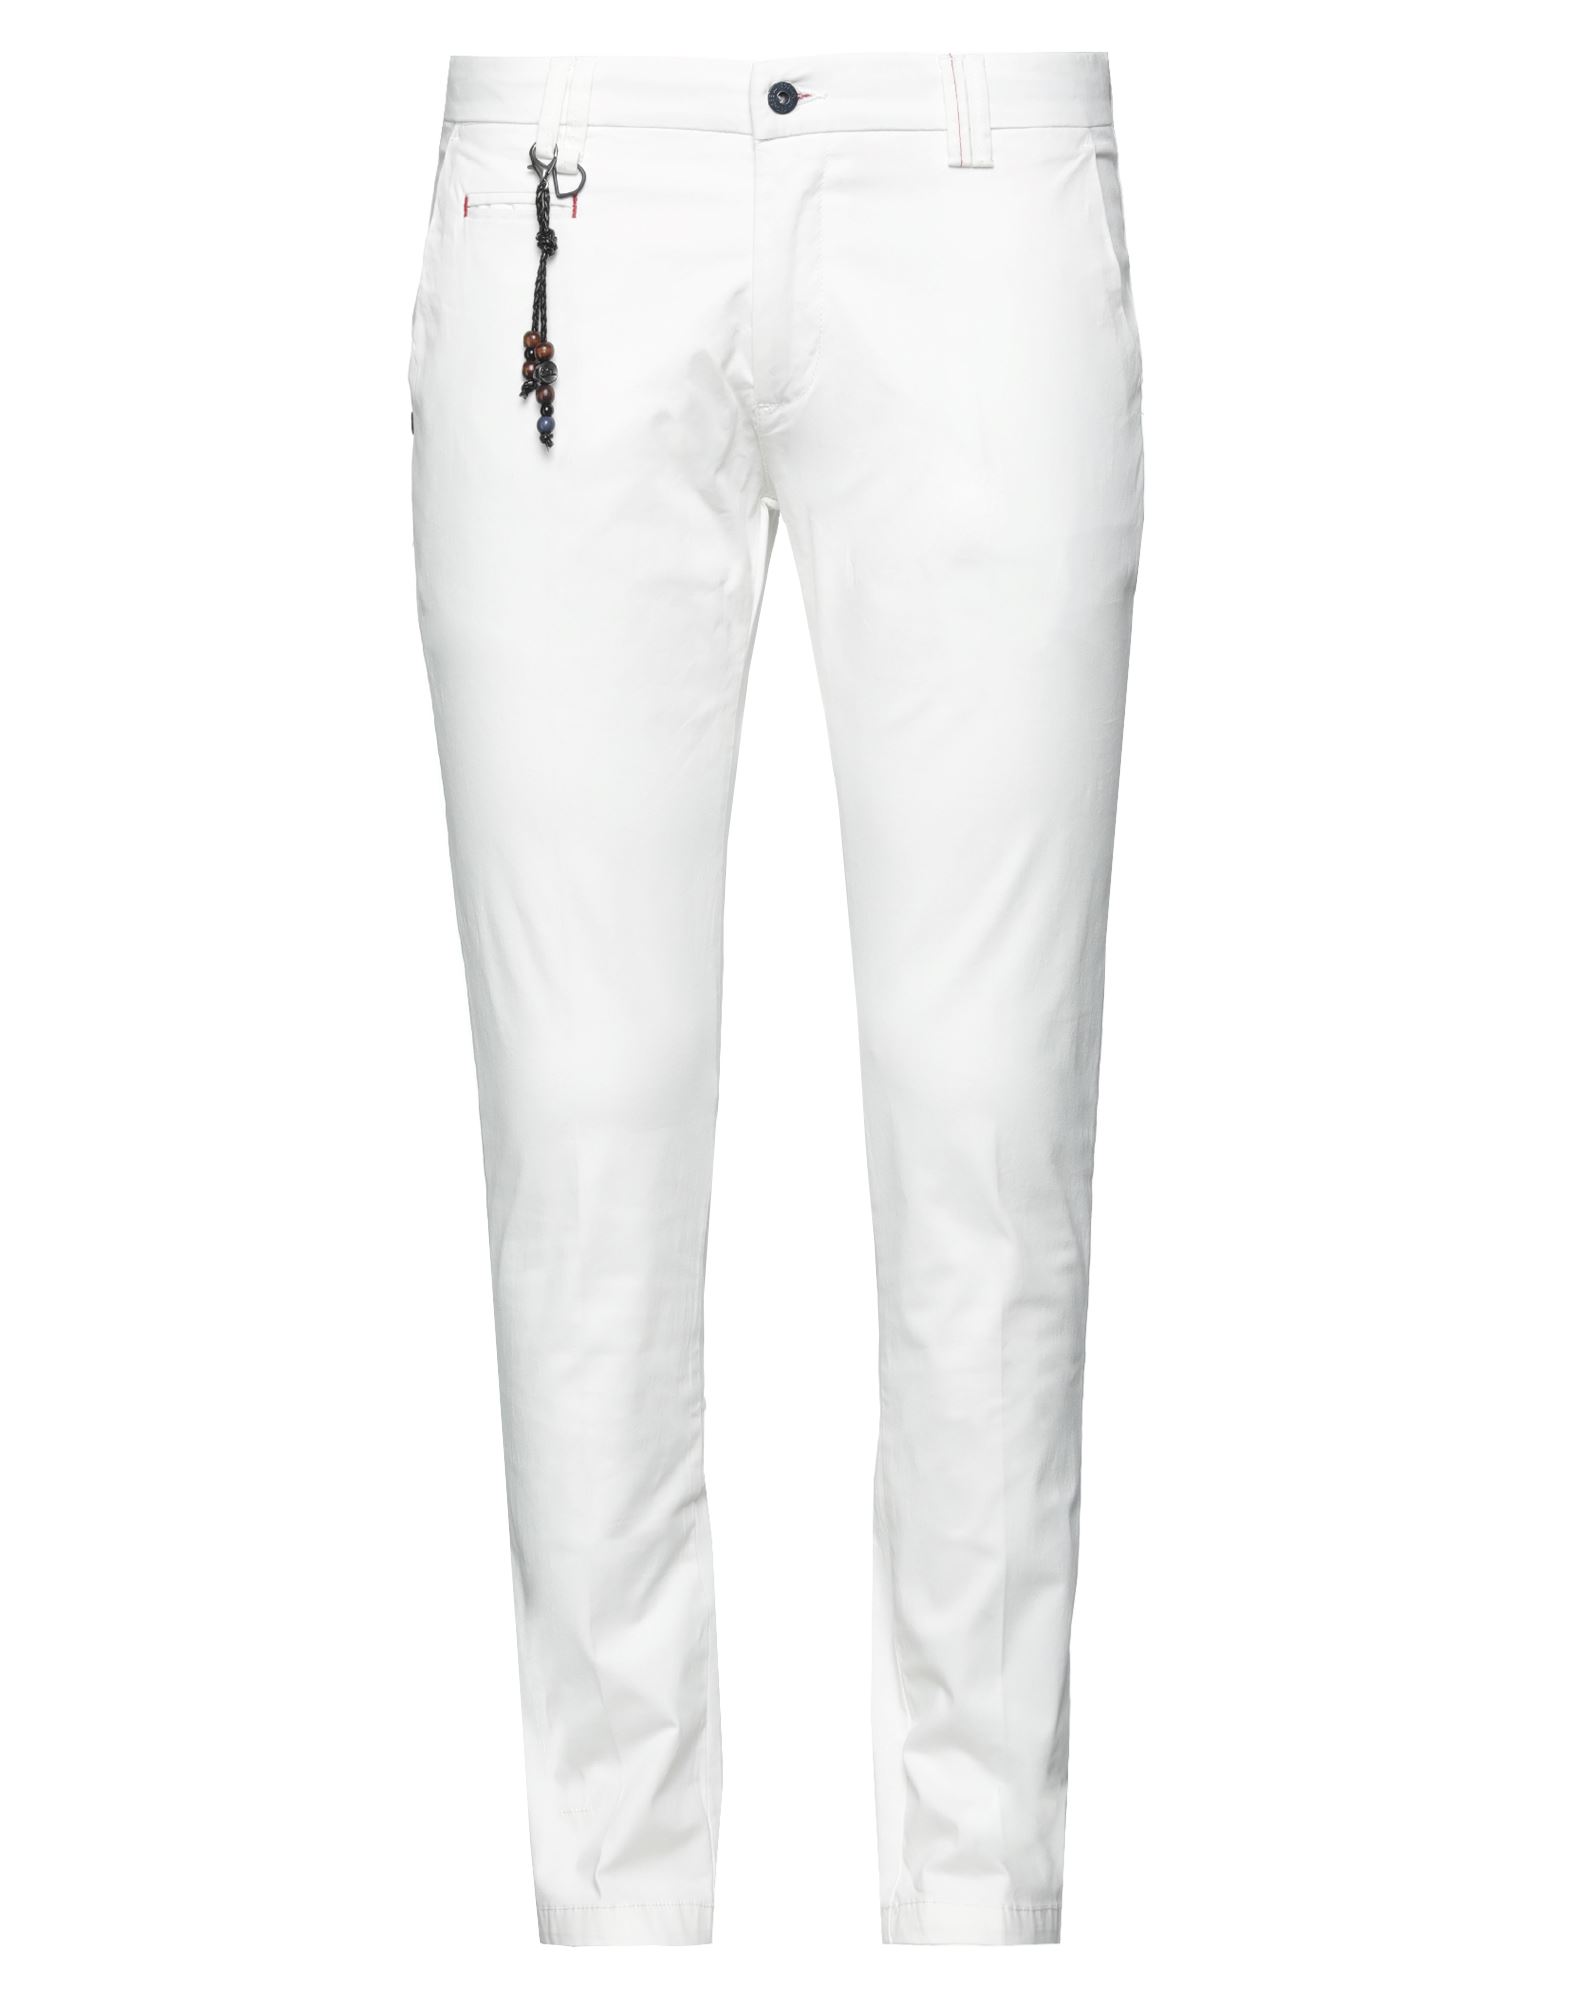 Yes Zee By Essenza Pants In White